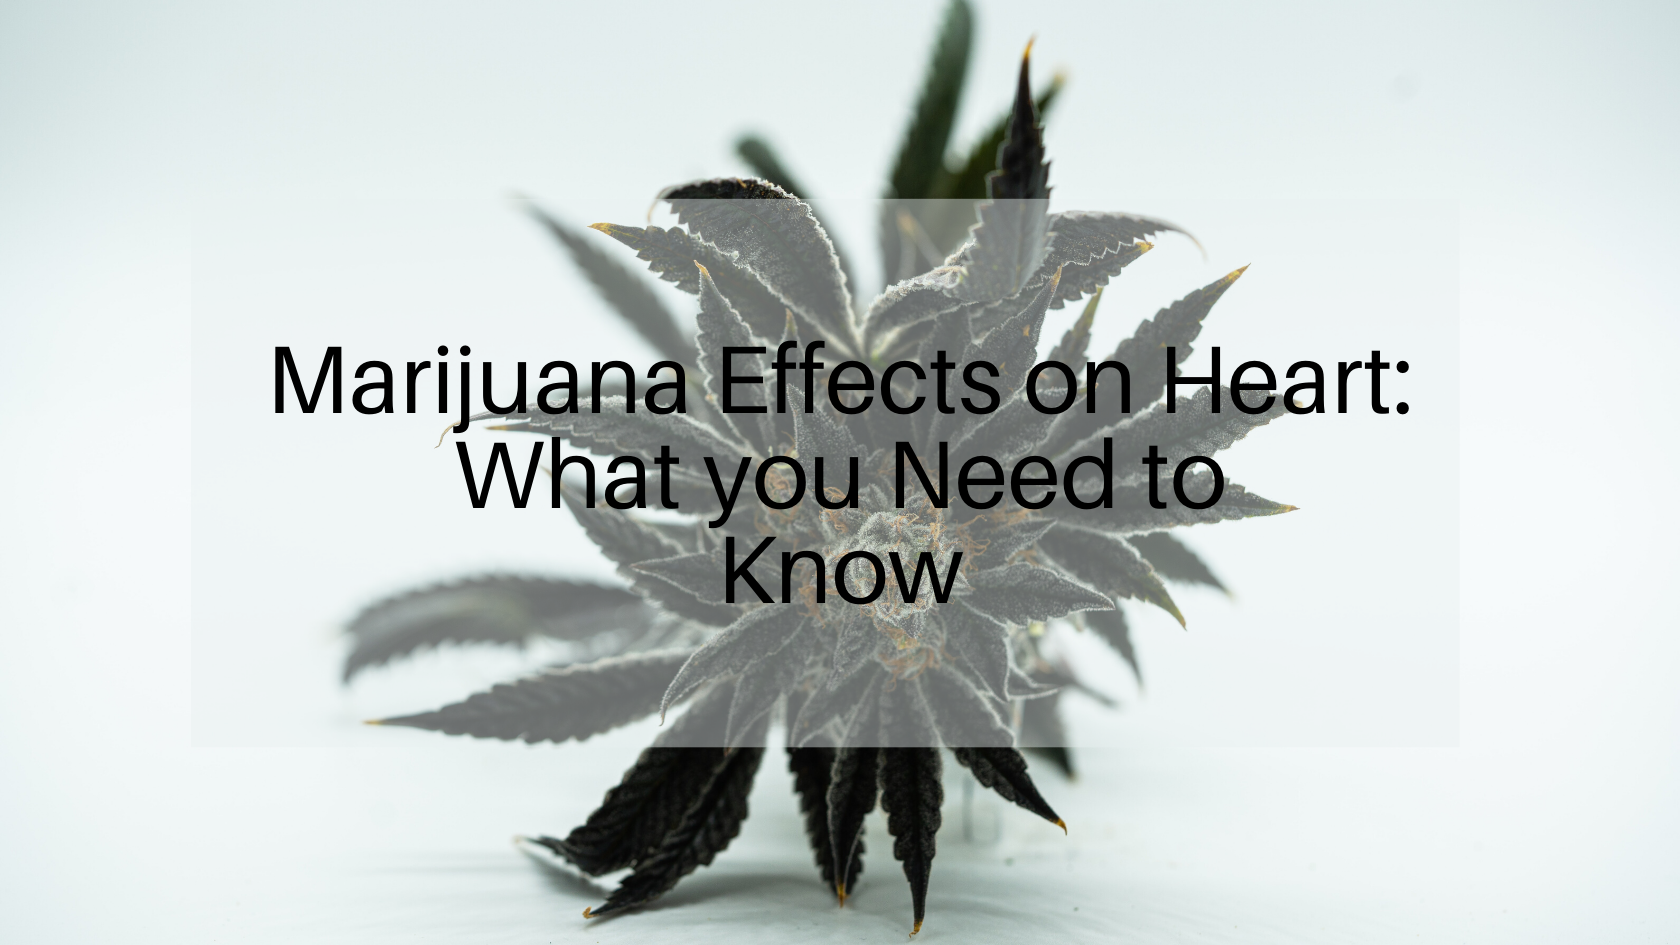 Marijuana Effects on the Heart: What you Need to Know